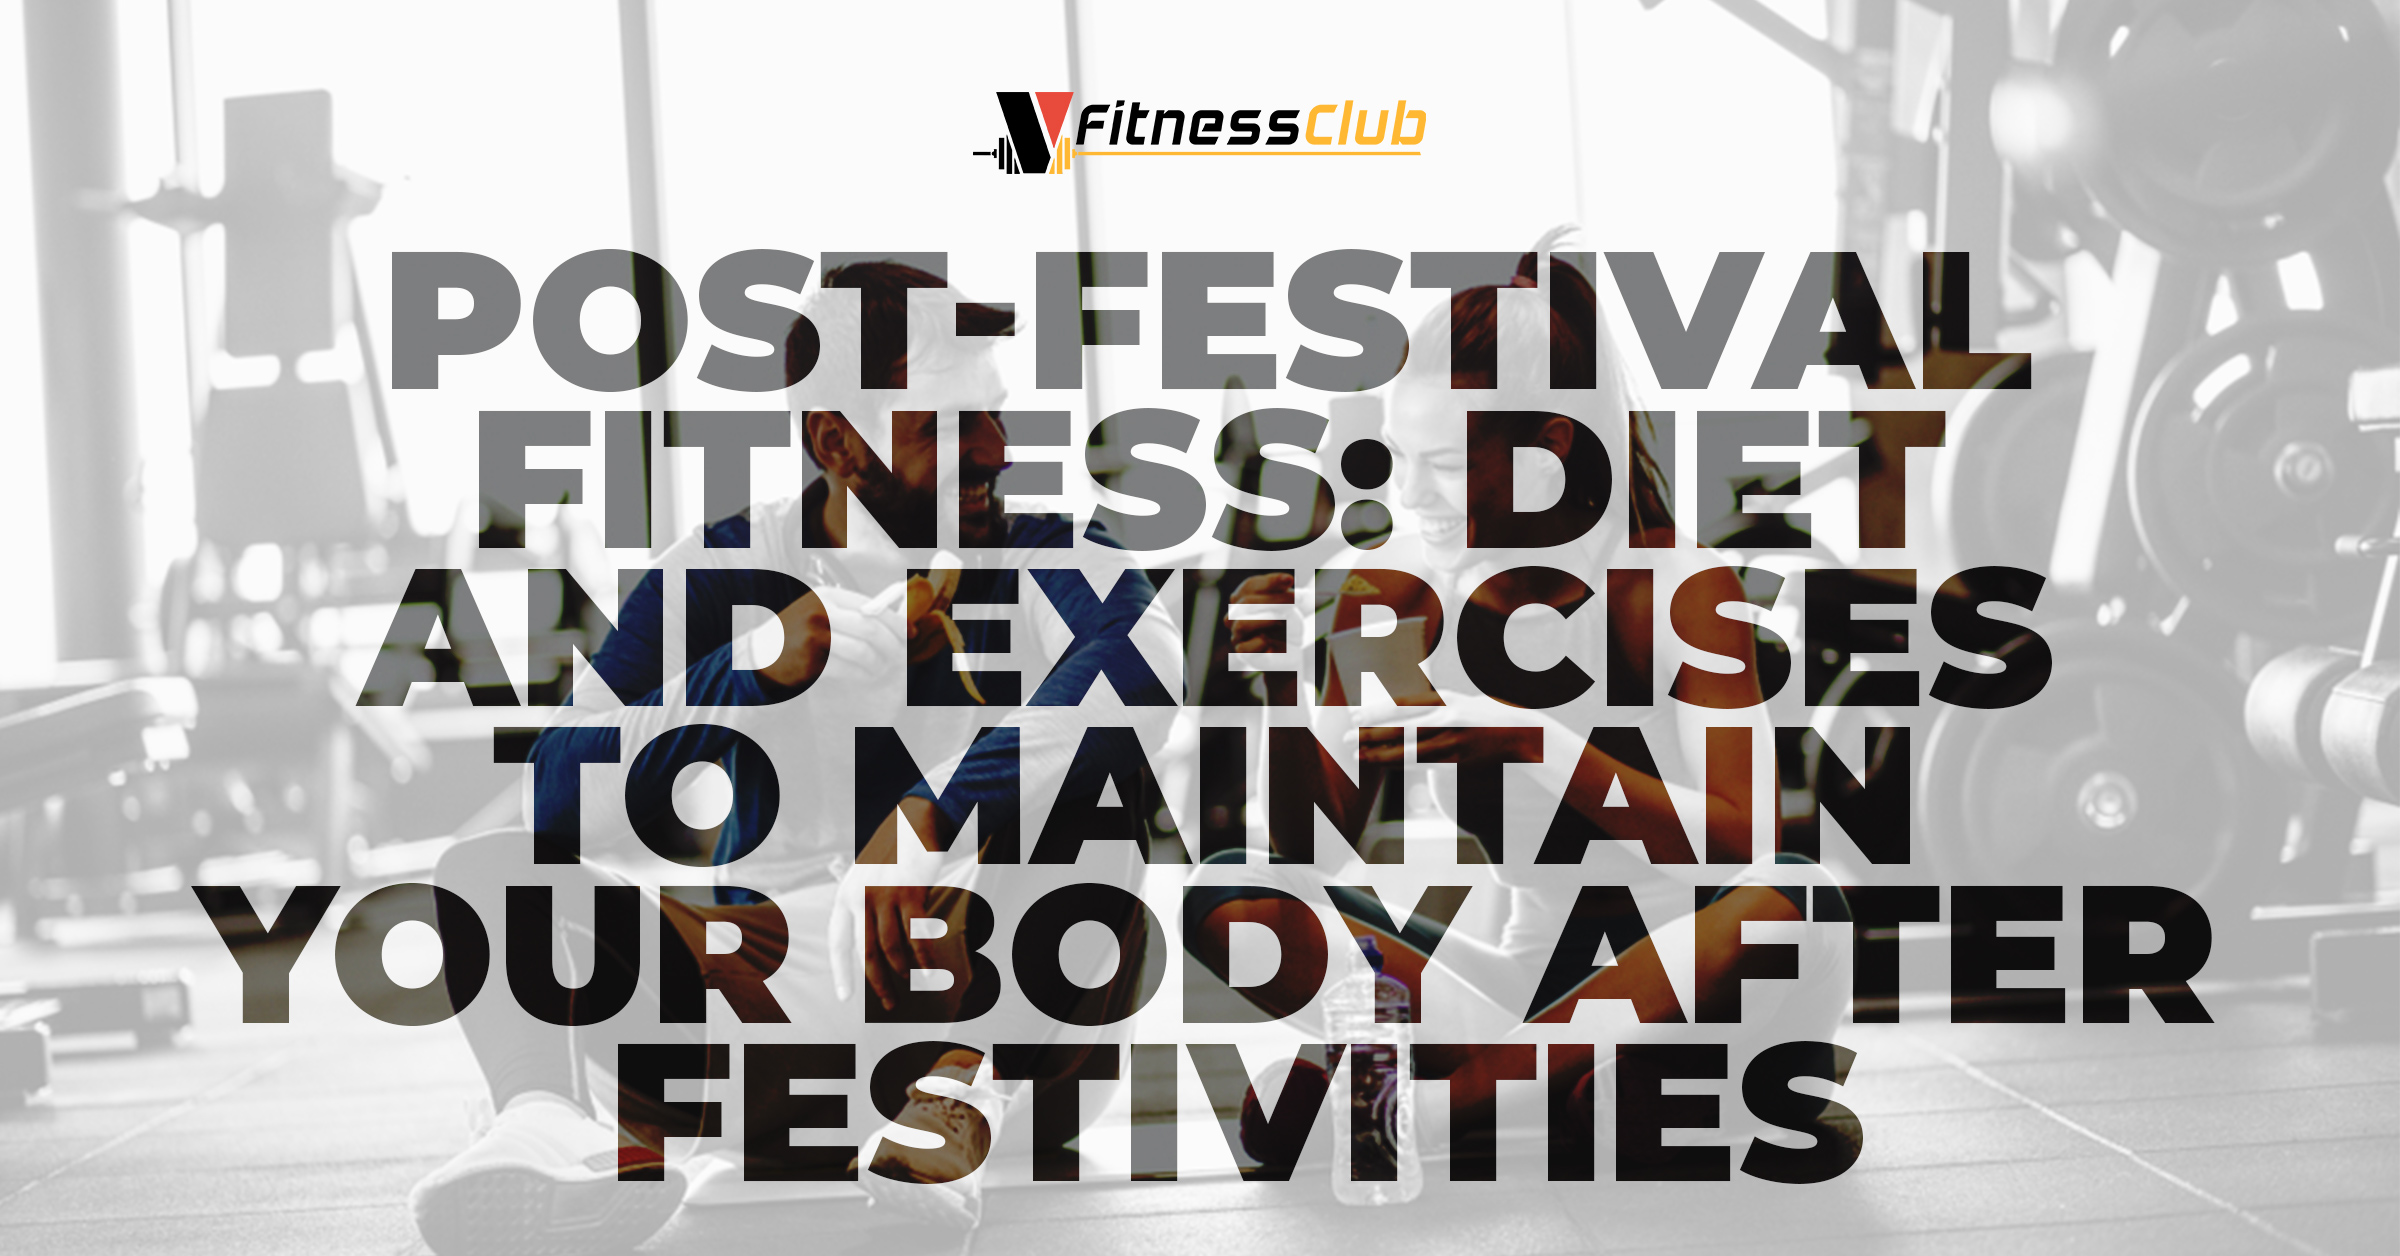 Post-Festival Fitness: Diet and exercises to maintain your body after festivities